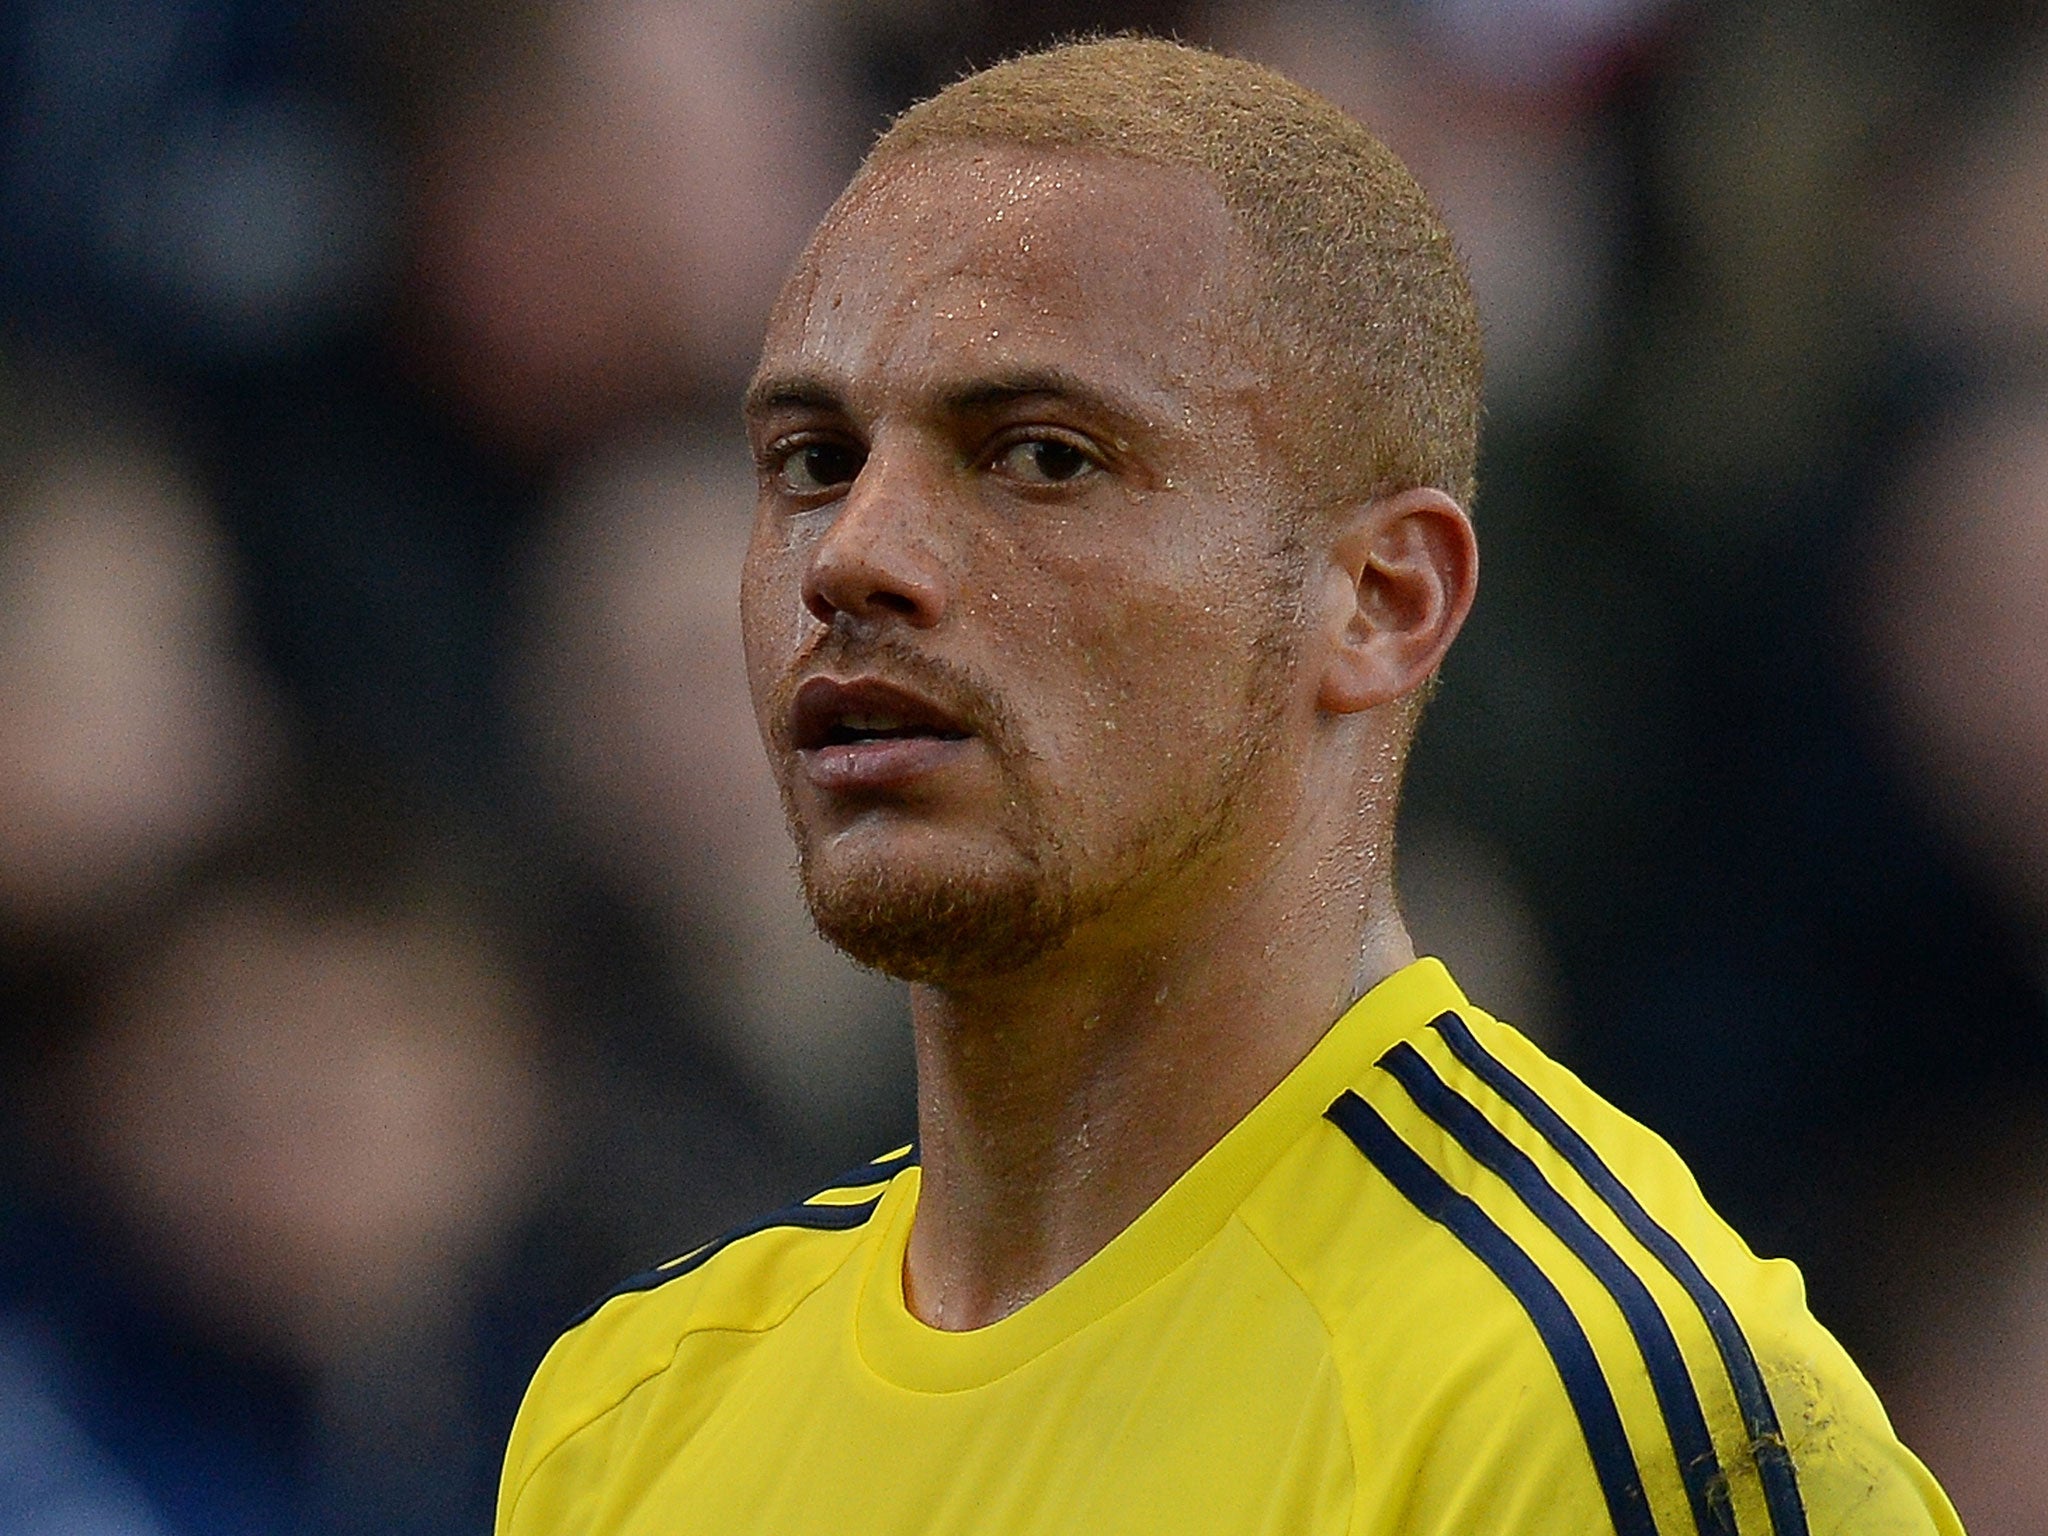 Sunderland defender Wes Brown walks off at the Brittania Stadium after being sent-off in the defeat to Stoke